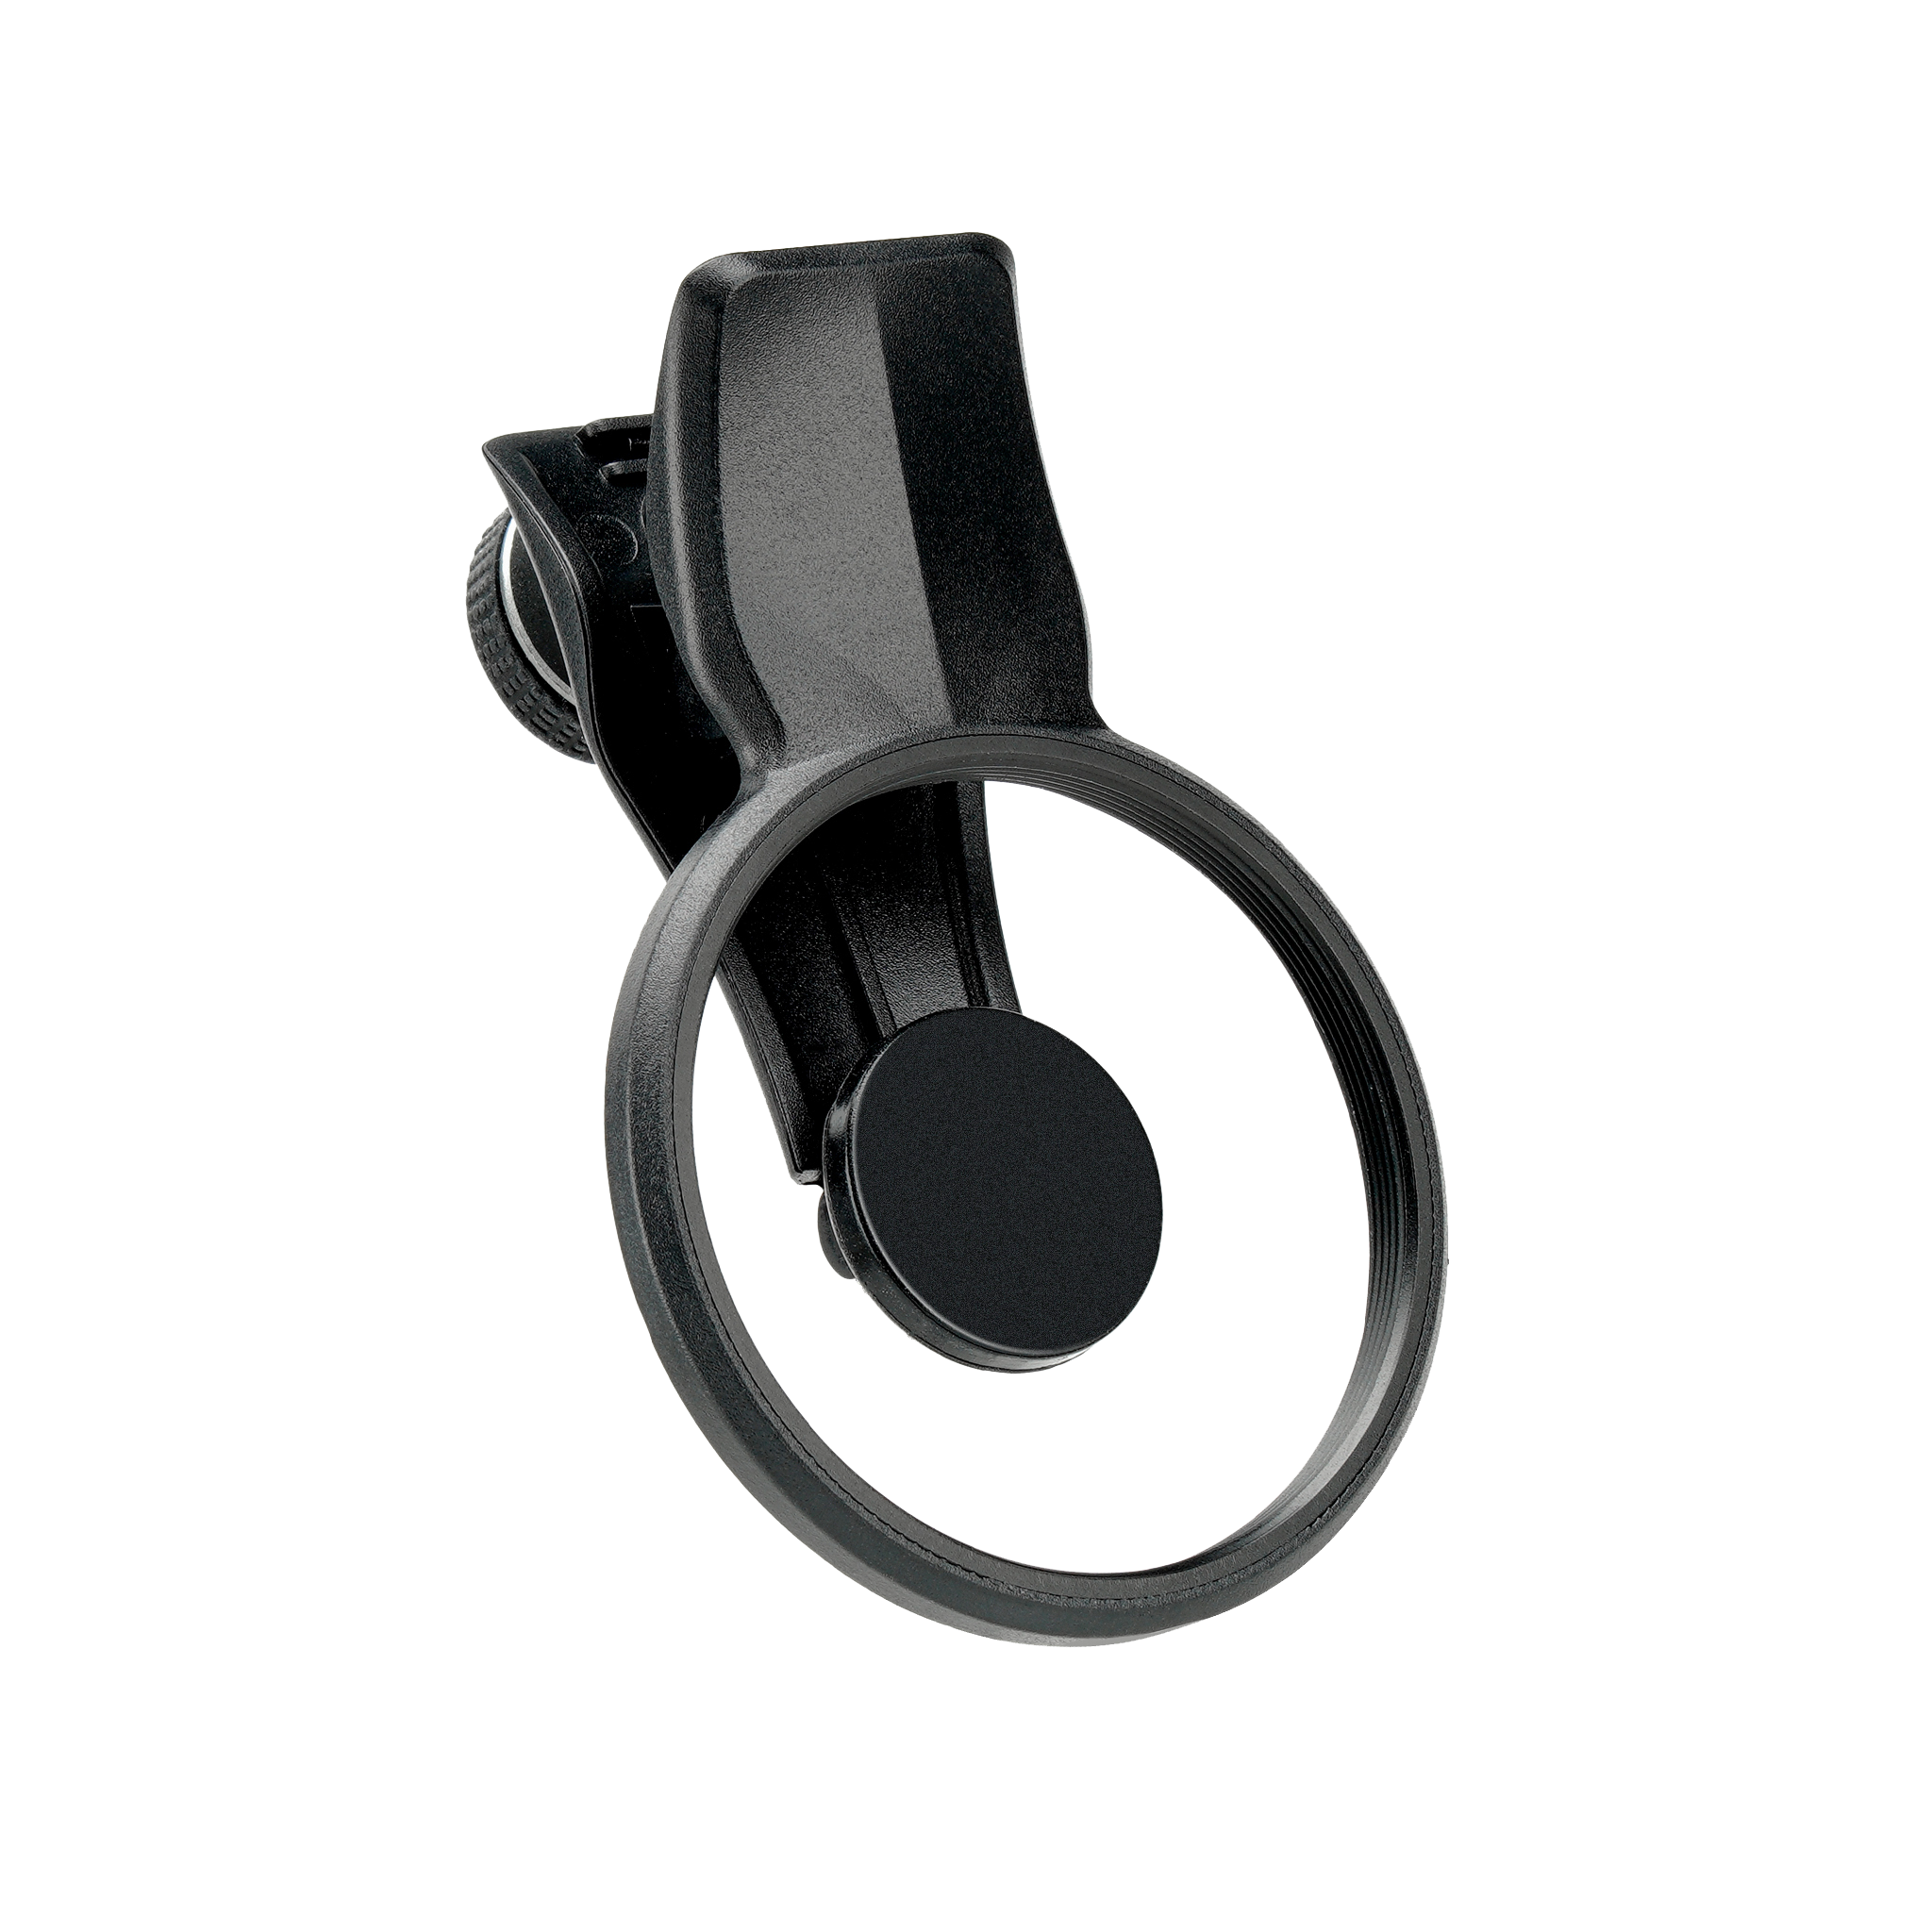 EXAPRO Filter Clip For Smarphone, Adapter For φ49mm Lens Filter